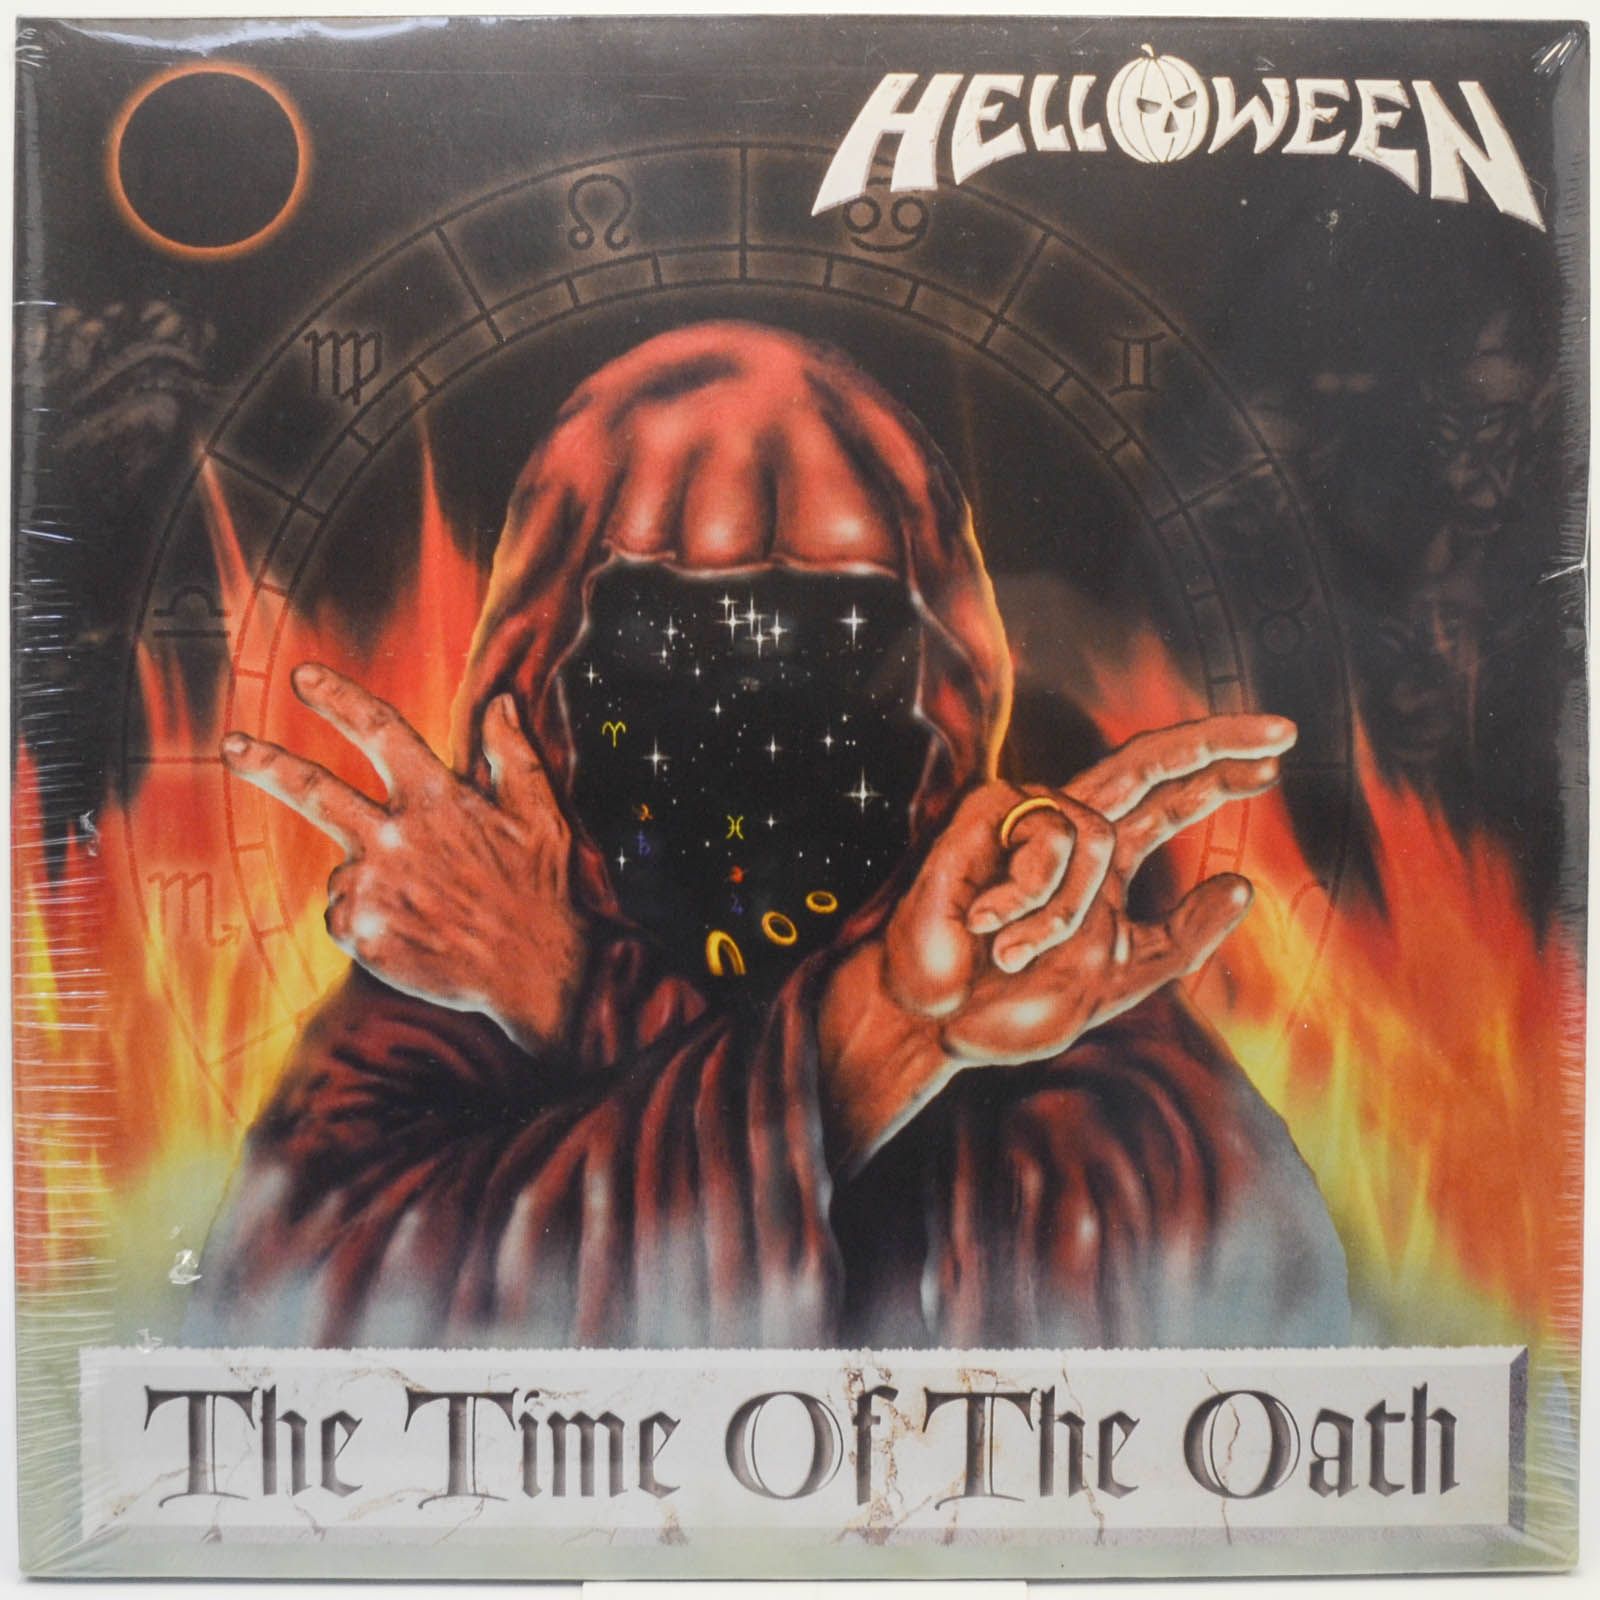 Helloween — The Time Of The Oath, 1996